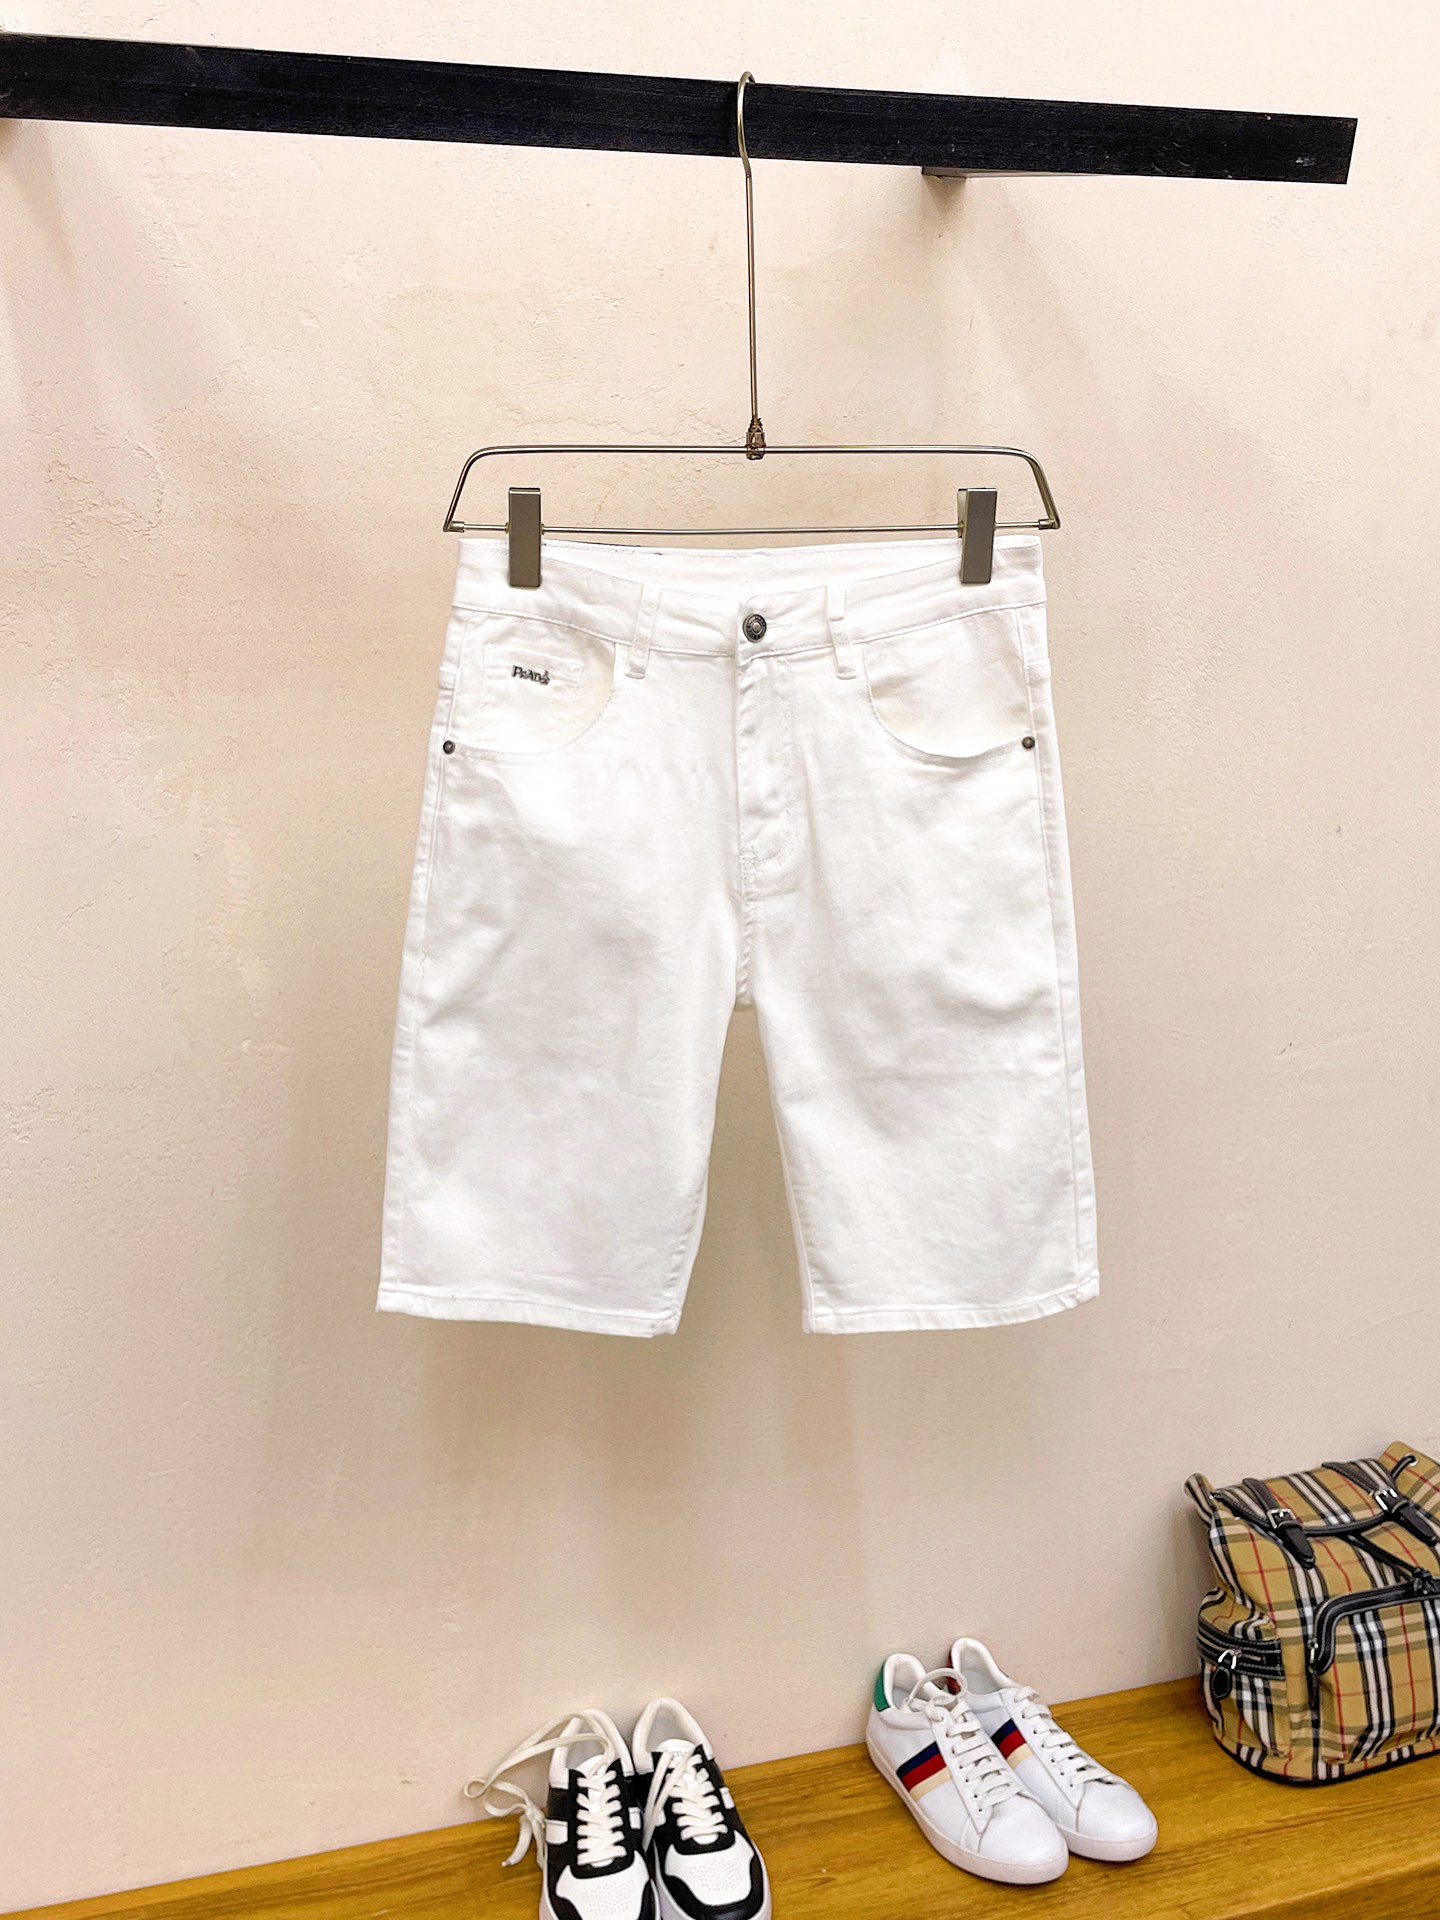 Prada Clothing Jeans Shorts Cotton Summer Collection Fashion